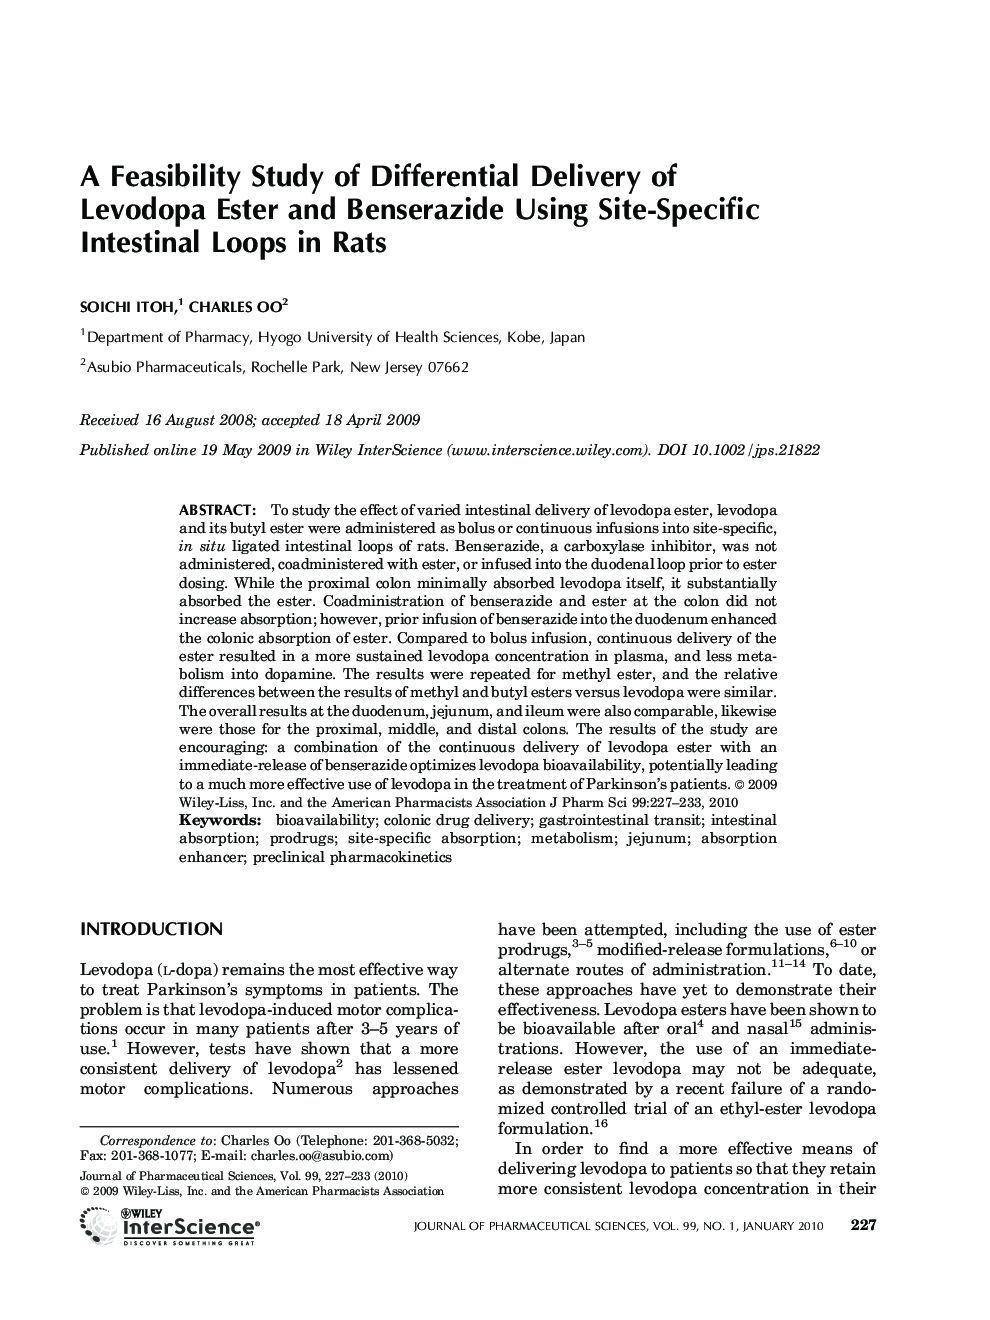 A feasibility study of differential delivery of levodopa ester and benserazide using site-specific intestinal loops in rats